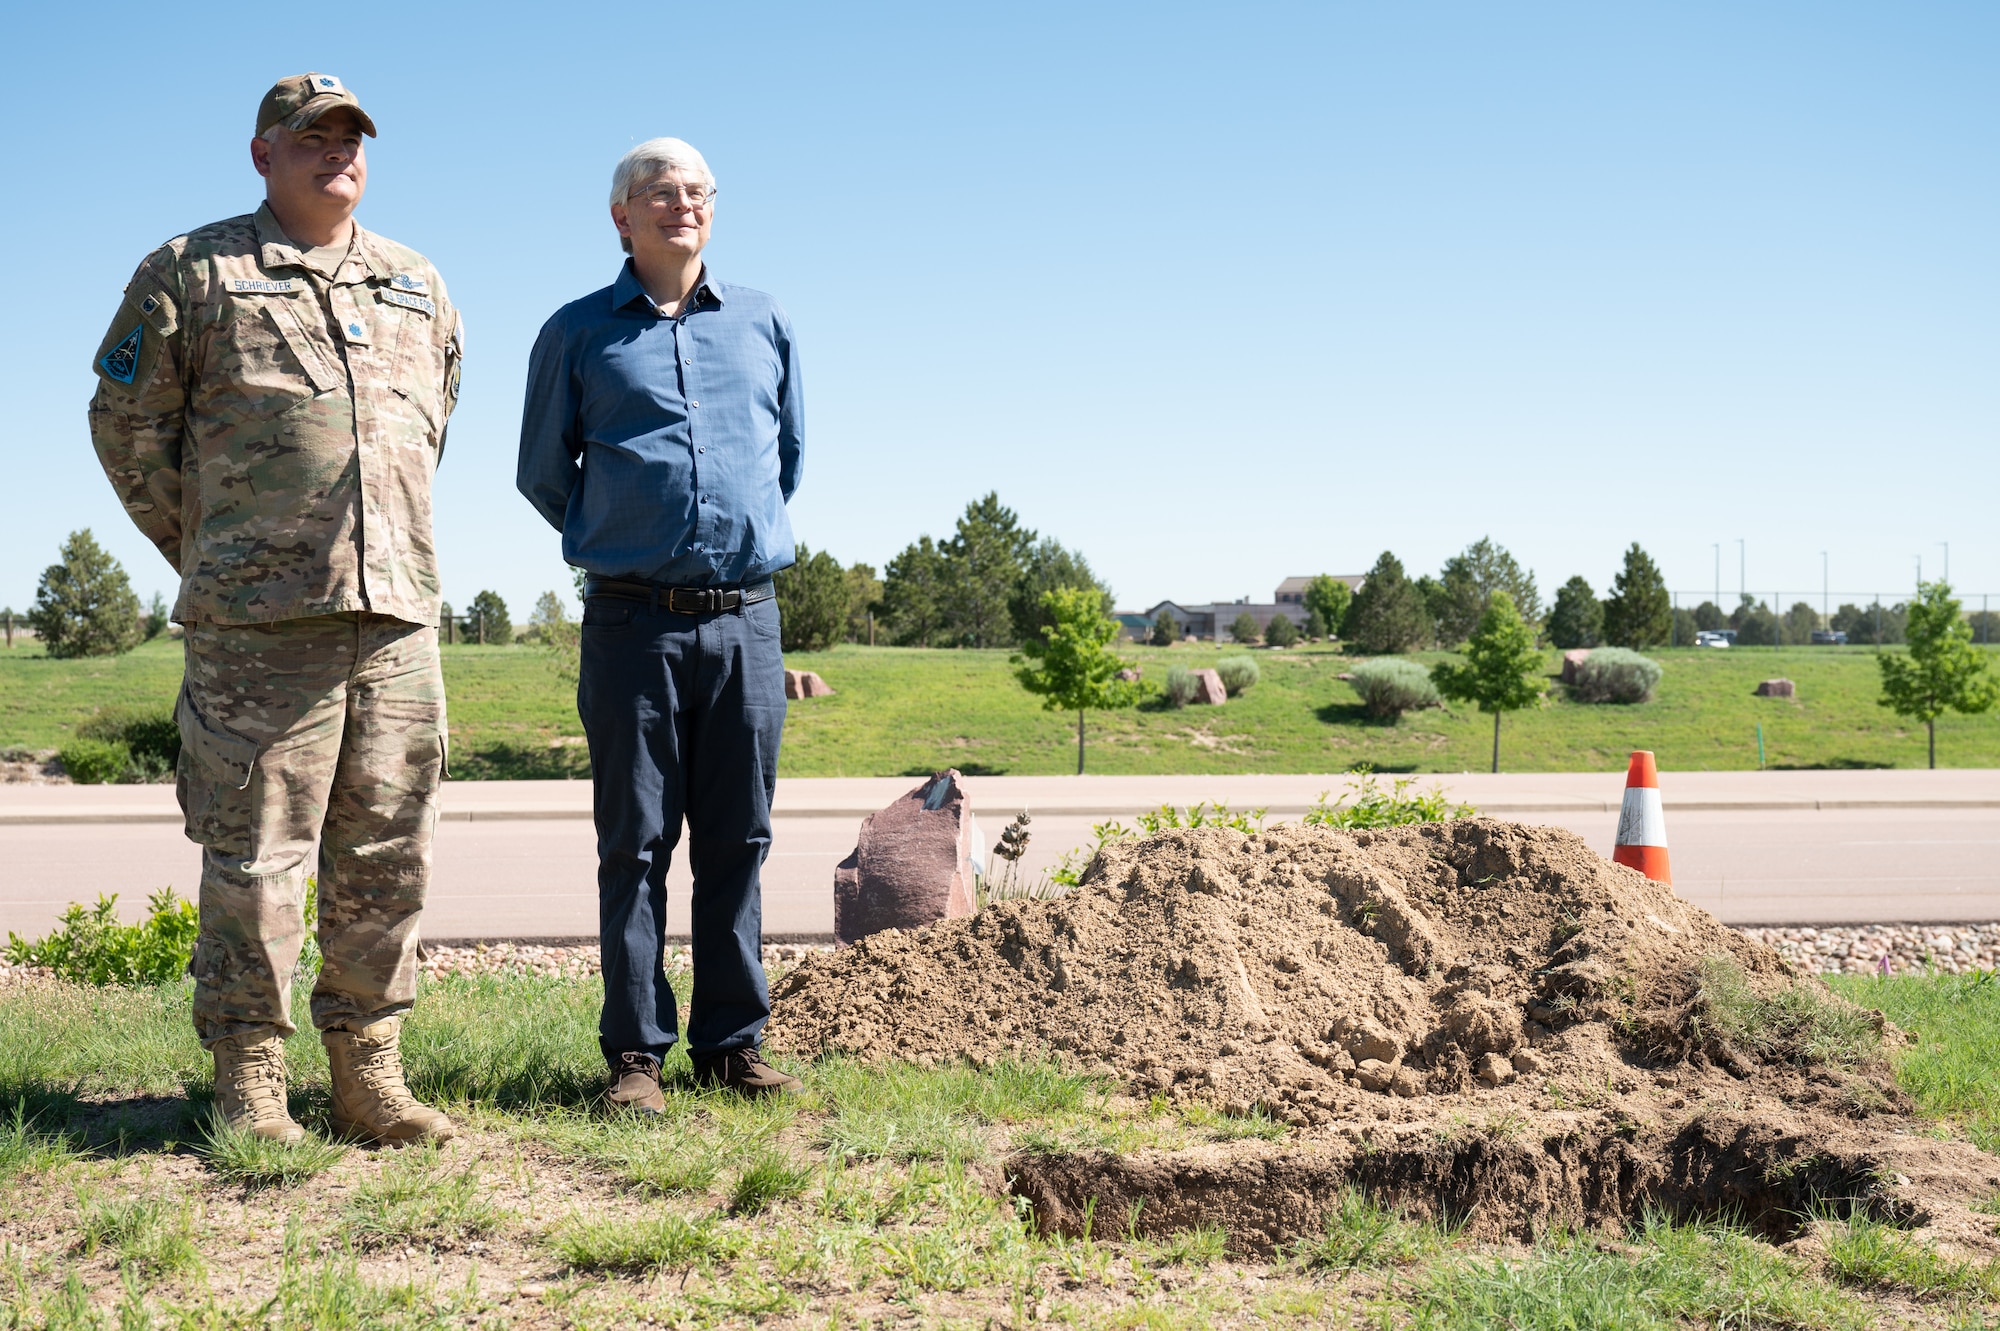 U.S. Space Force Lt. Col. Michael Schriever, Chief of the Engine Room for Space Training and Readiness Command, and Bernard A. Schriever II, a civil engineer at the U.S. Air Force Academy, stand next to the site where the Team Schriever time capsule was buried on Schriever Space Force Base on June 21, 2023. They are both grandsons of the late Gen. Bernard A. Schriever, for whom Schriever SFB was named. (U.S. Space Force photo by Airman 1st Class Justin Todd)